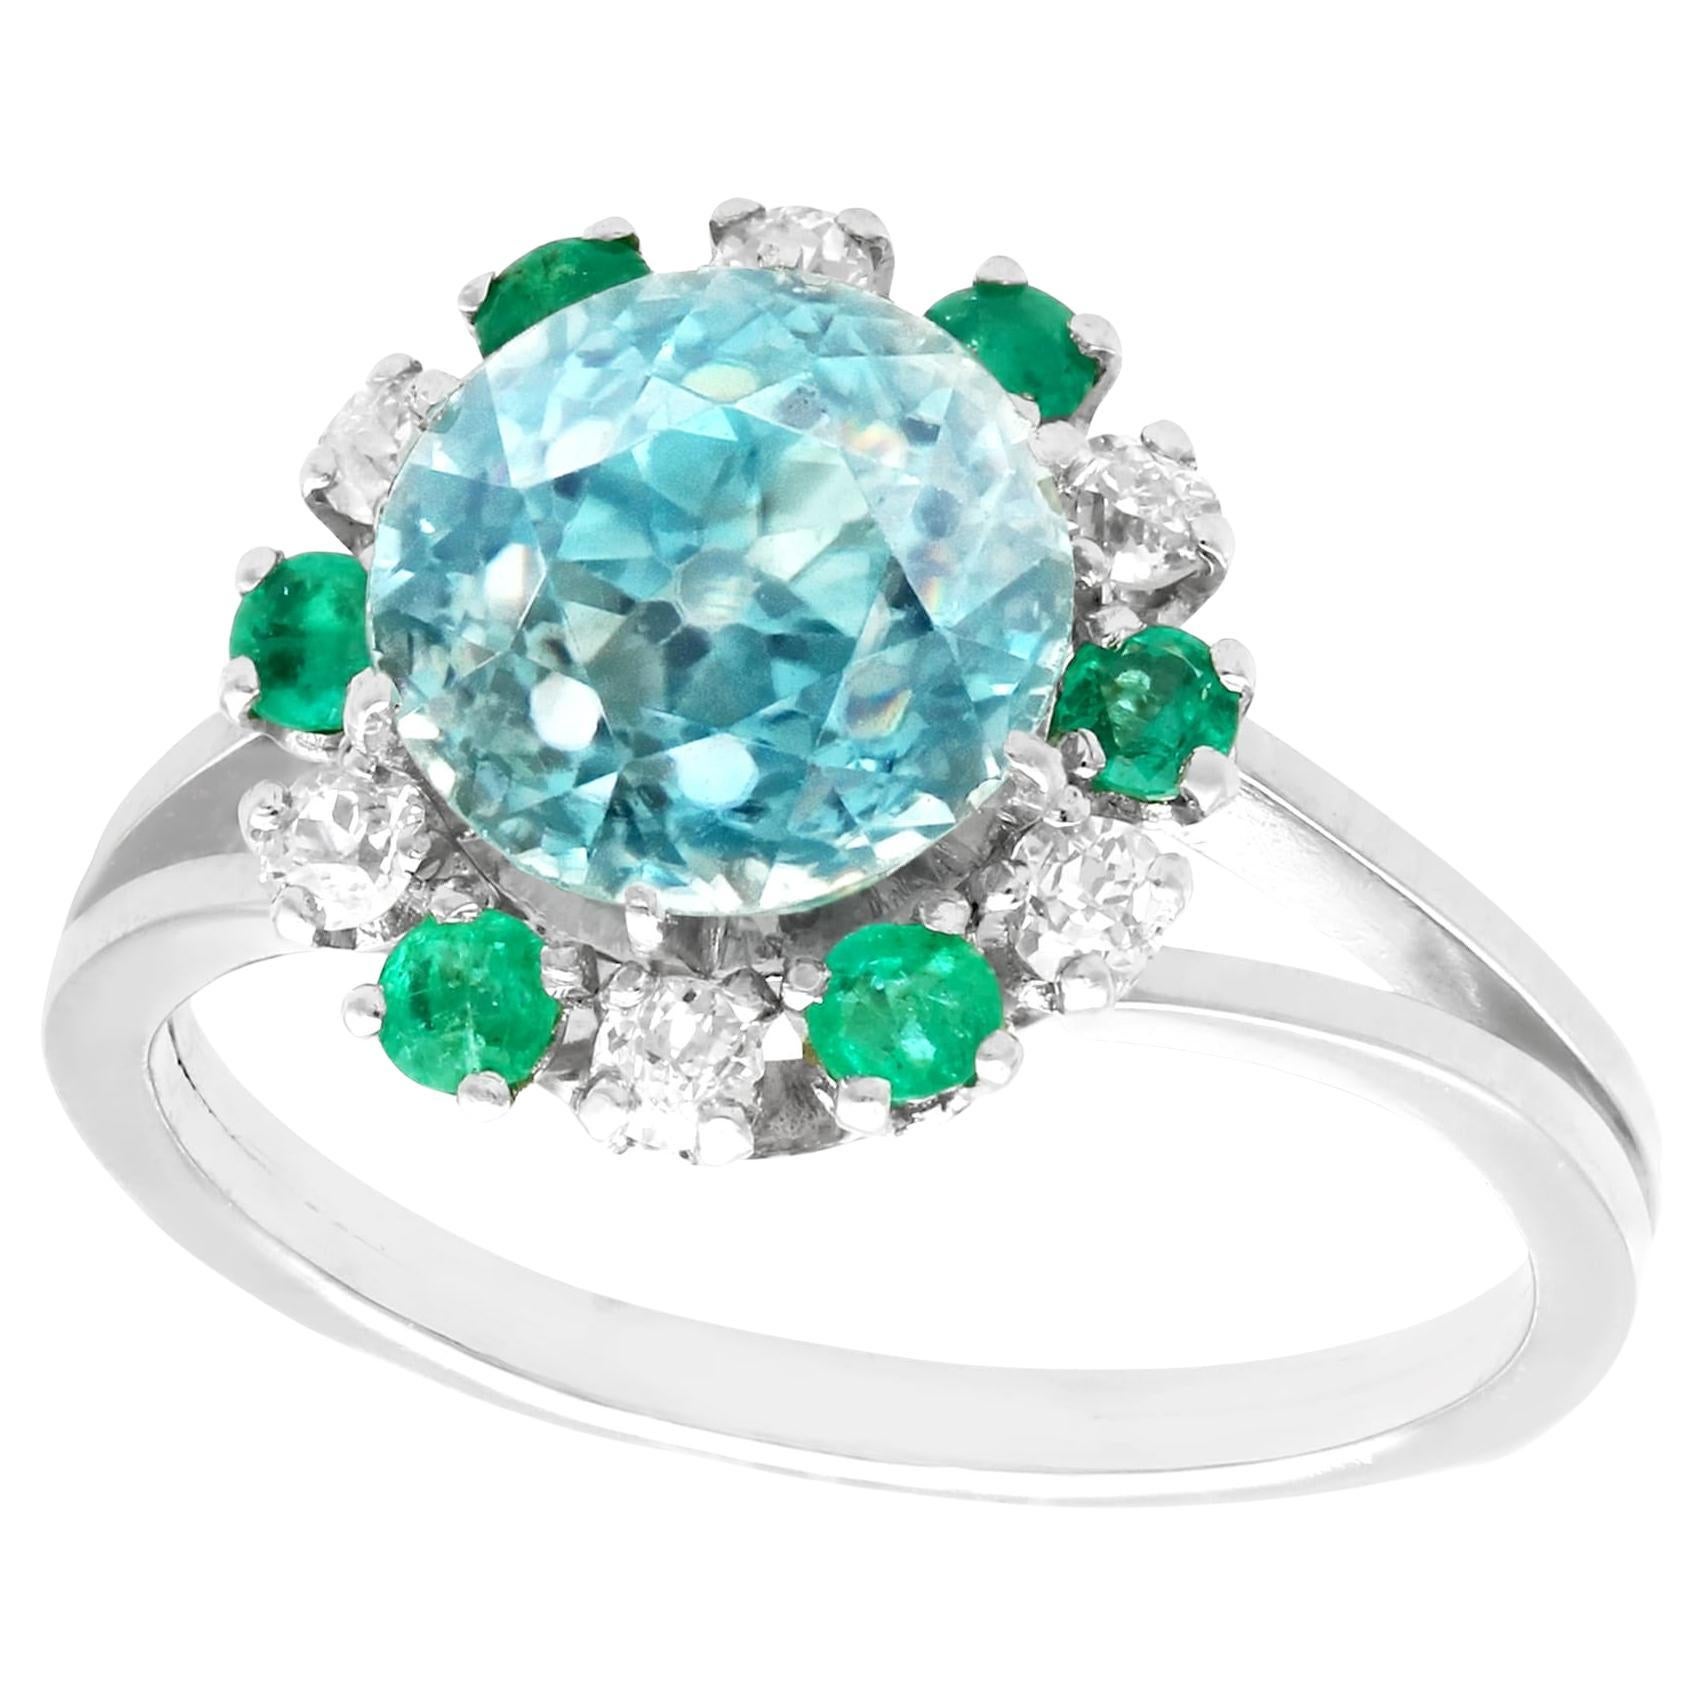 1940s French Zircon Diamond Emerald and White Gold Cocktail Ring For Sale